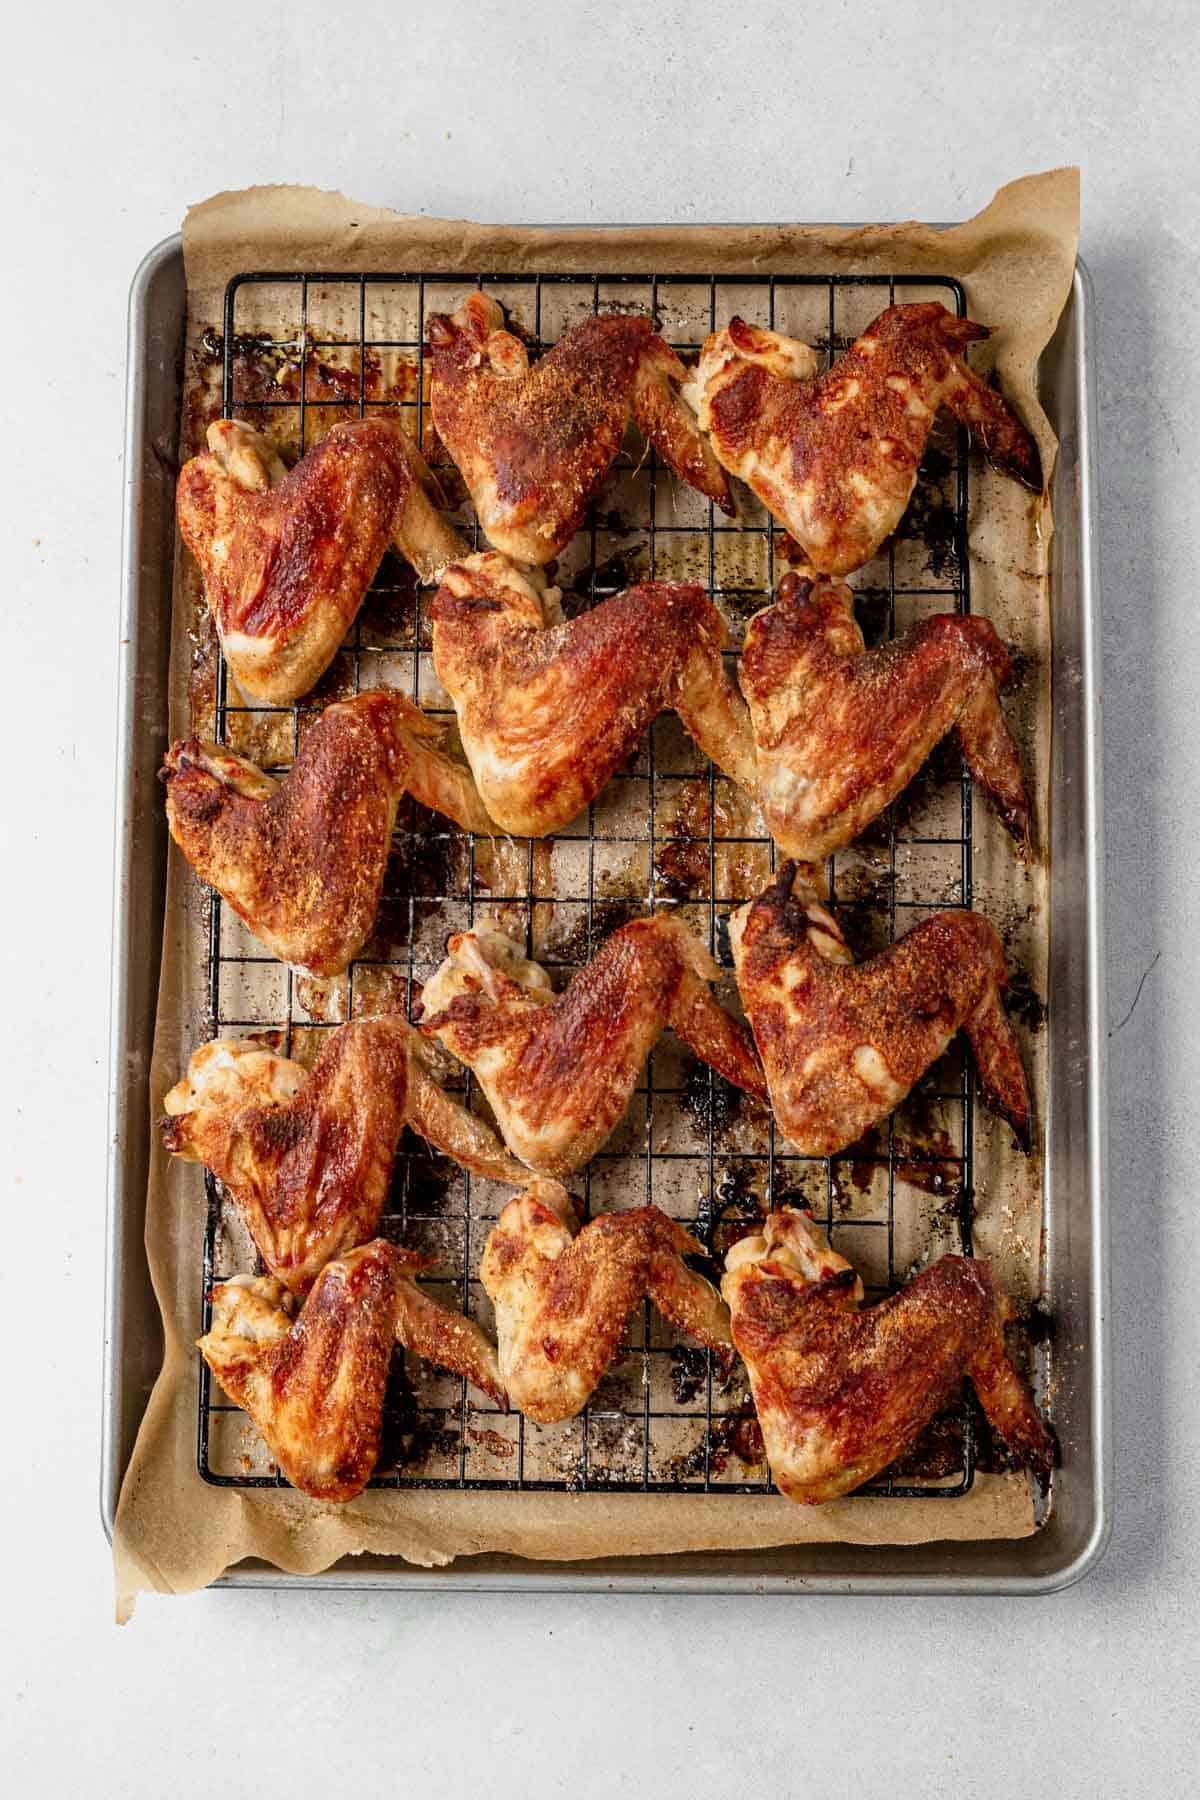 crispy baked chicken wings on a wire rack and baking sheet